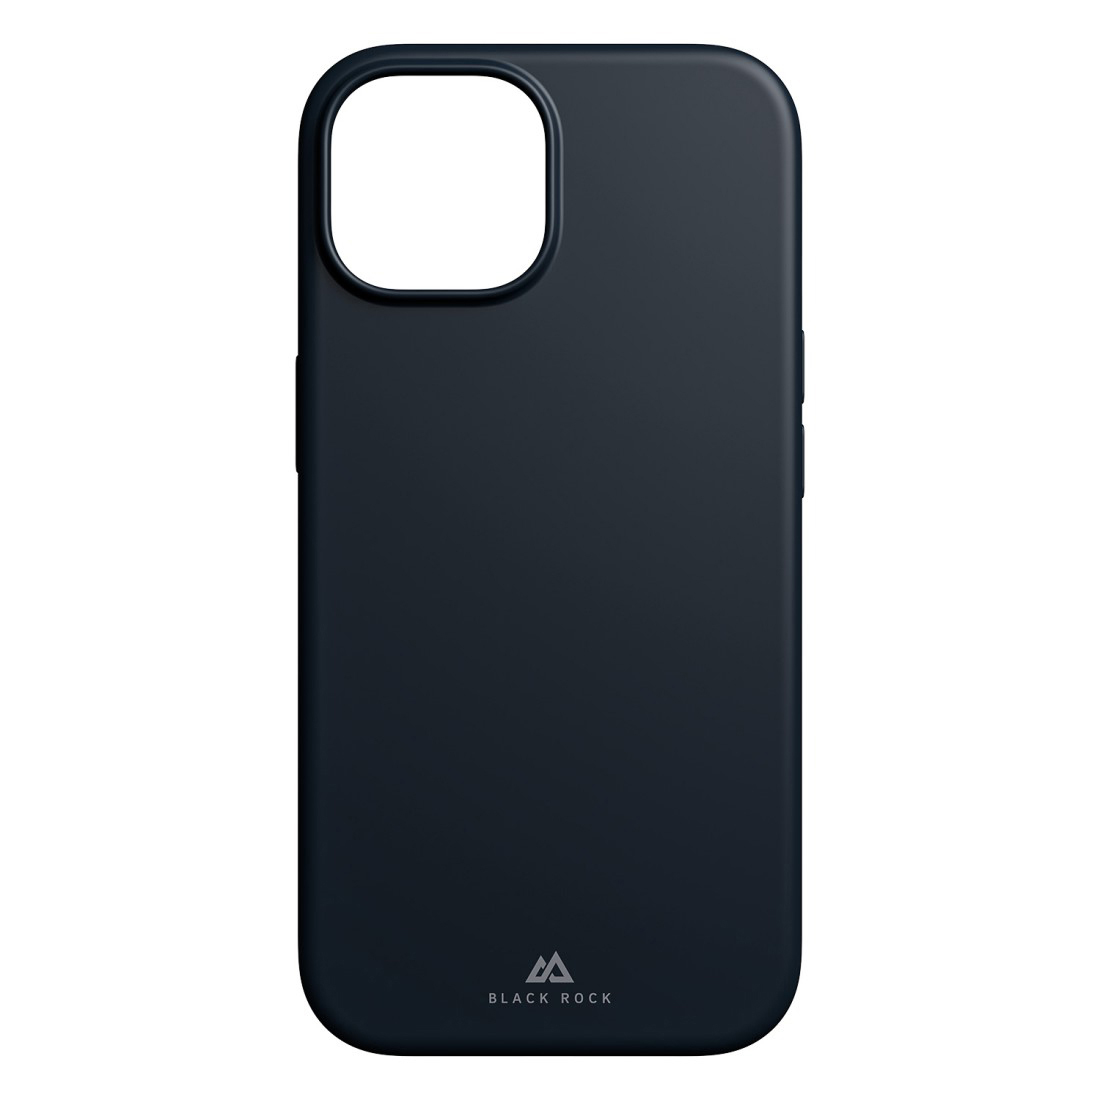 Mag Apple, ROCK iPhone Backcover, BLACK Midnight 15, Urban Case,